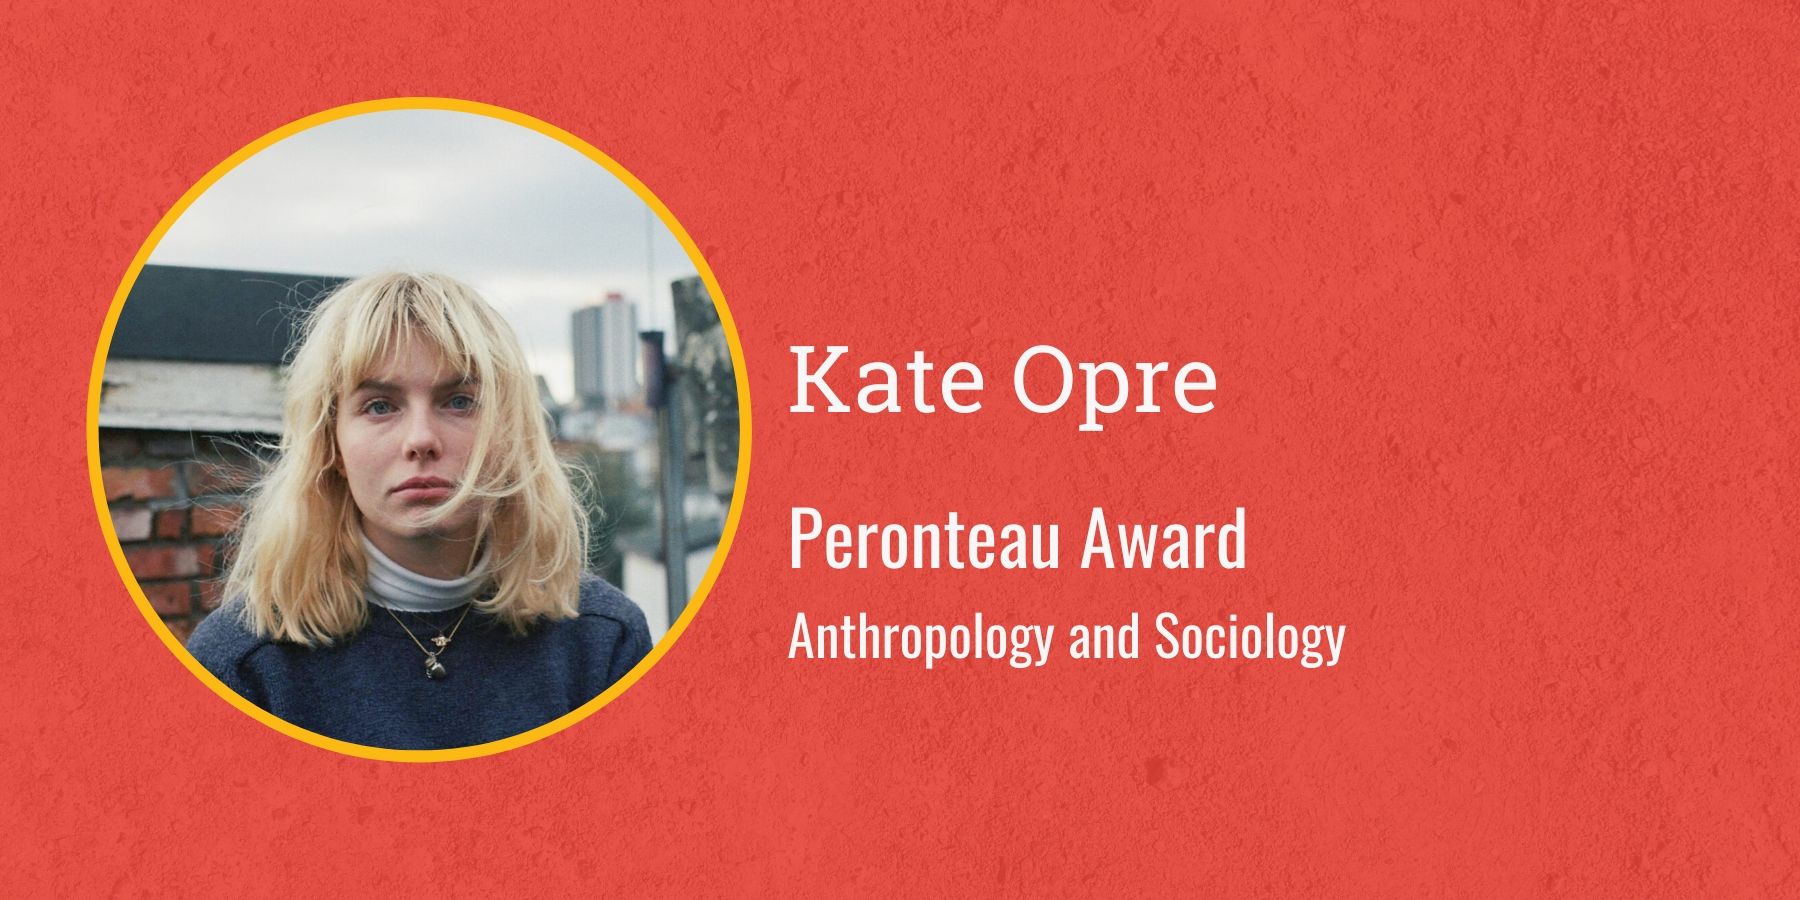 Photo of Kate Opre with text Peronteau Award, Anthropology and Sociology